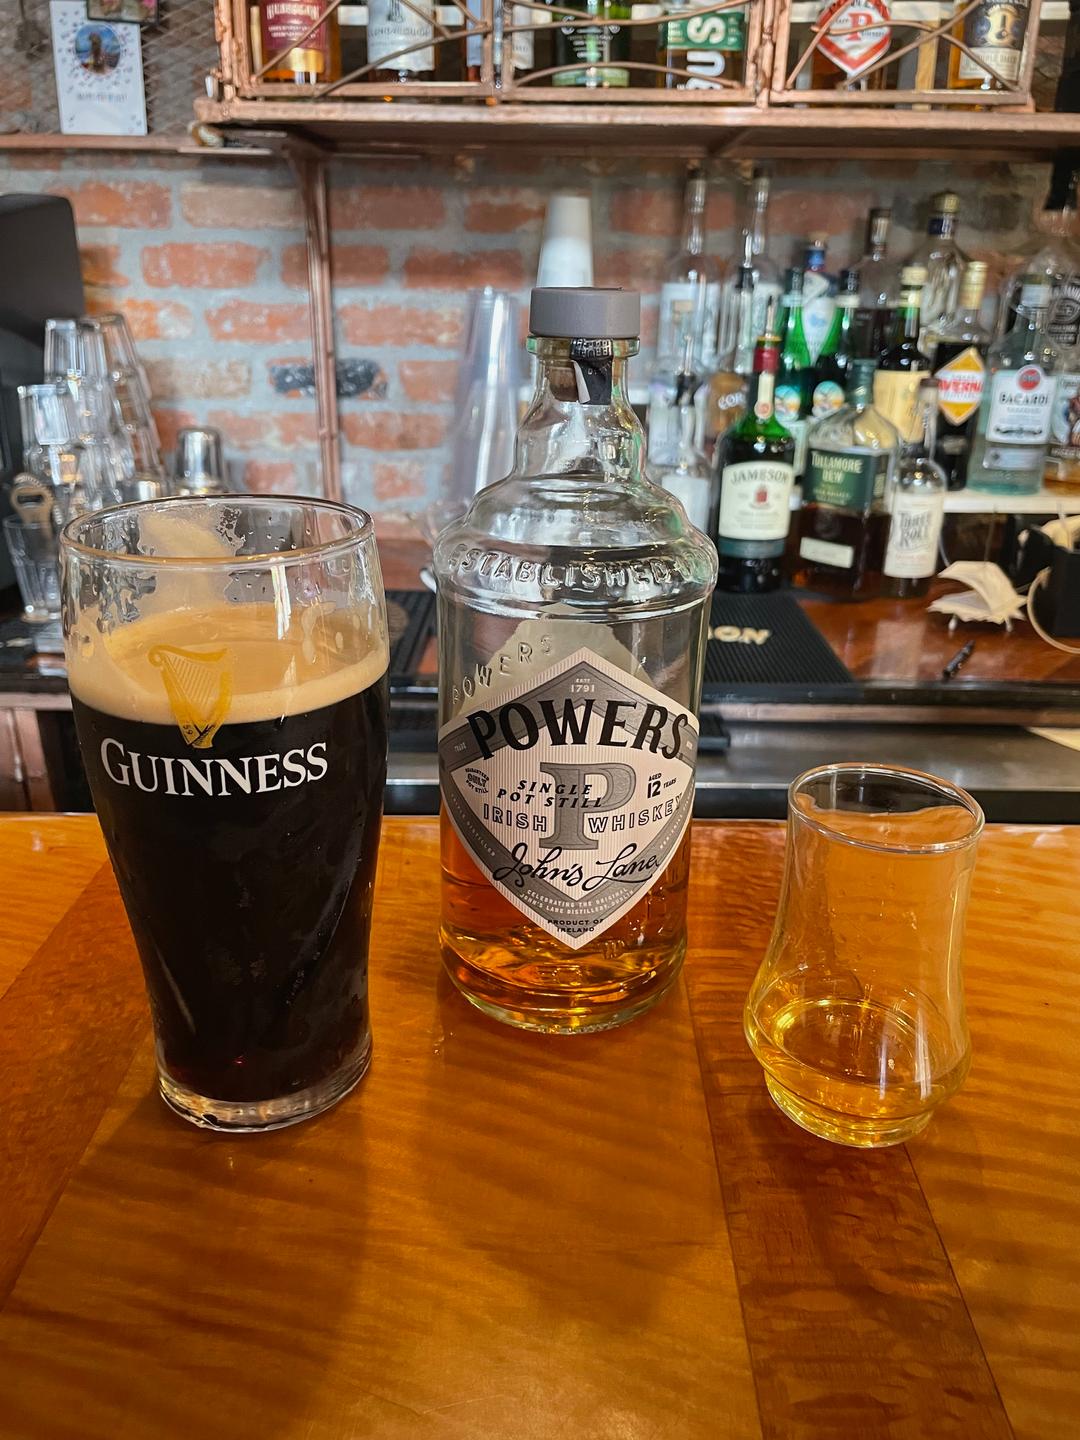 A glass of Guiness, Powers Whisky Bottle and glass of Whisky